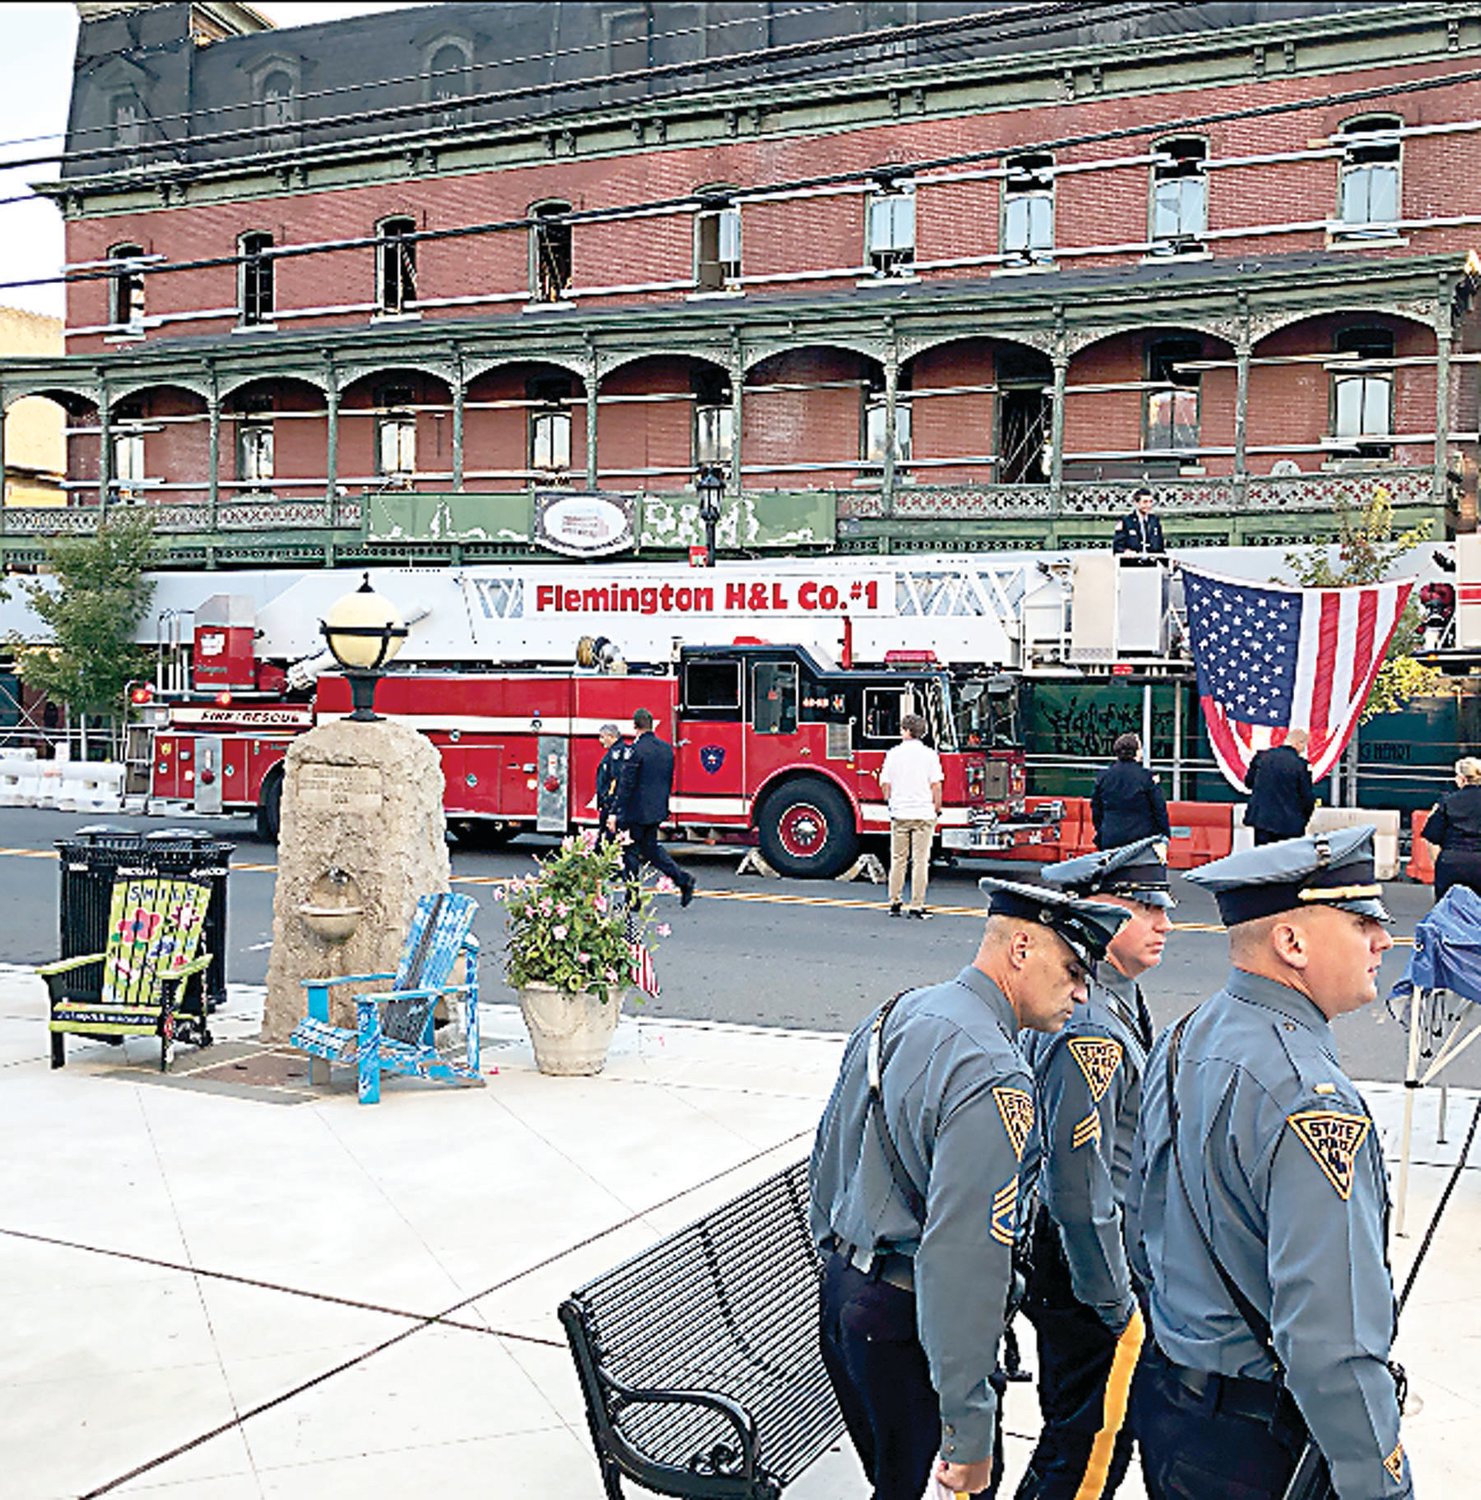 Members of the New Jersey State Police attended the ceremony, as did firefighters and other first responders.